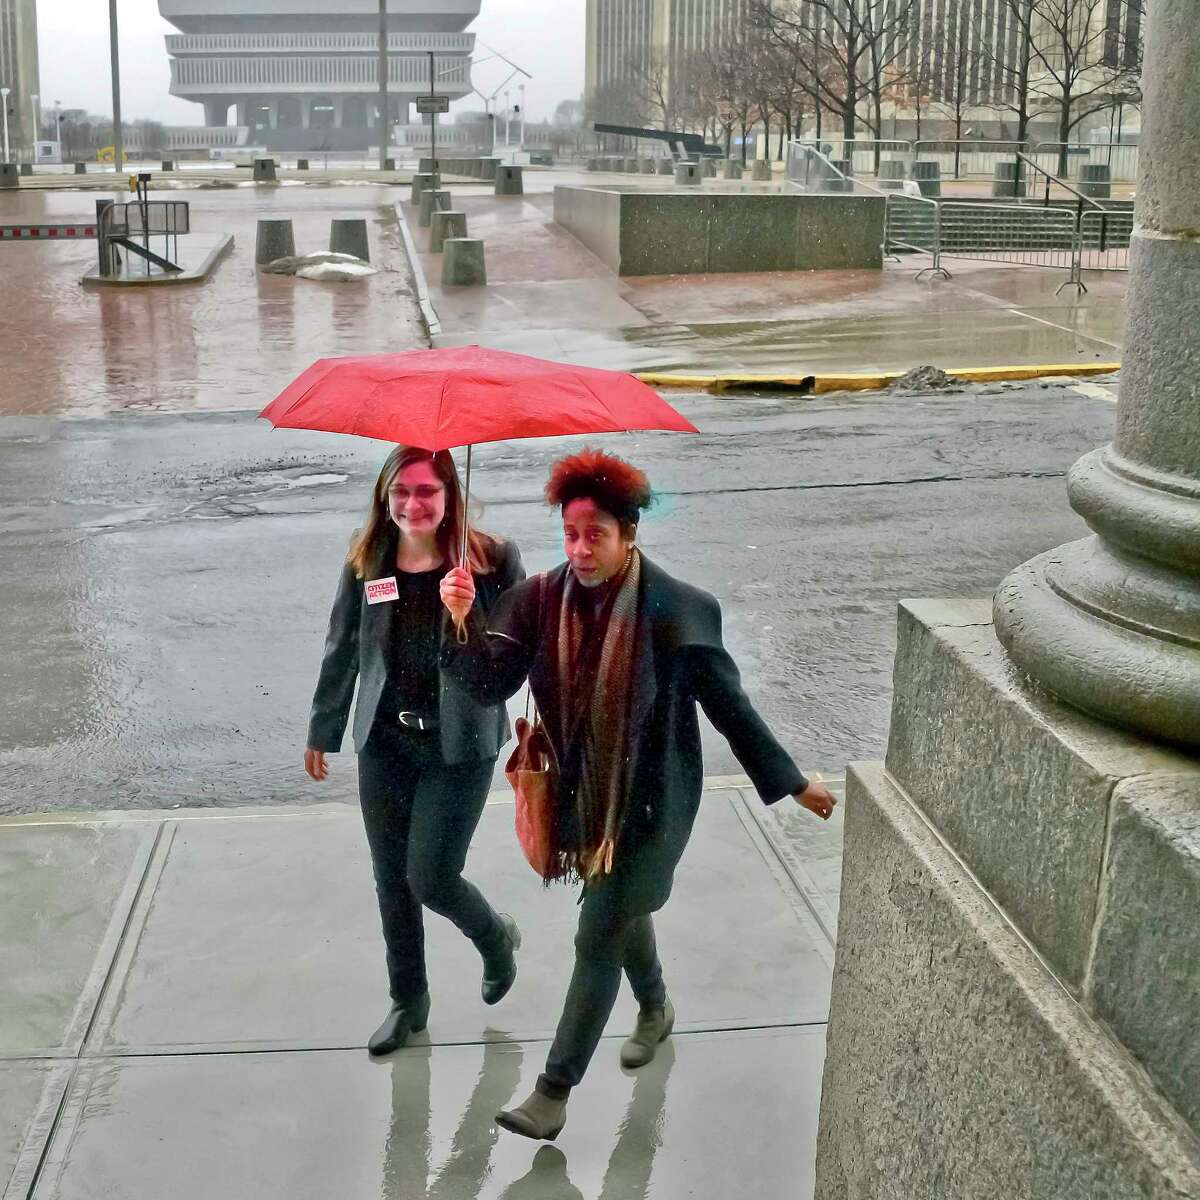 Jess Wisneski, left and Janel Quarless share an umbrella on their way to a voting rights rally at the Capitol Tuesday Jan. 23, 2018 in Albany, NY. (John Carl D'Annibale/Times Union)